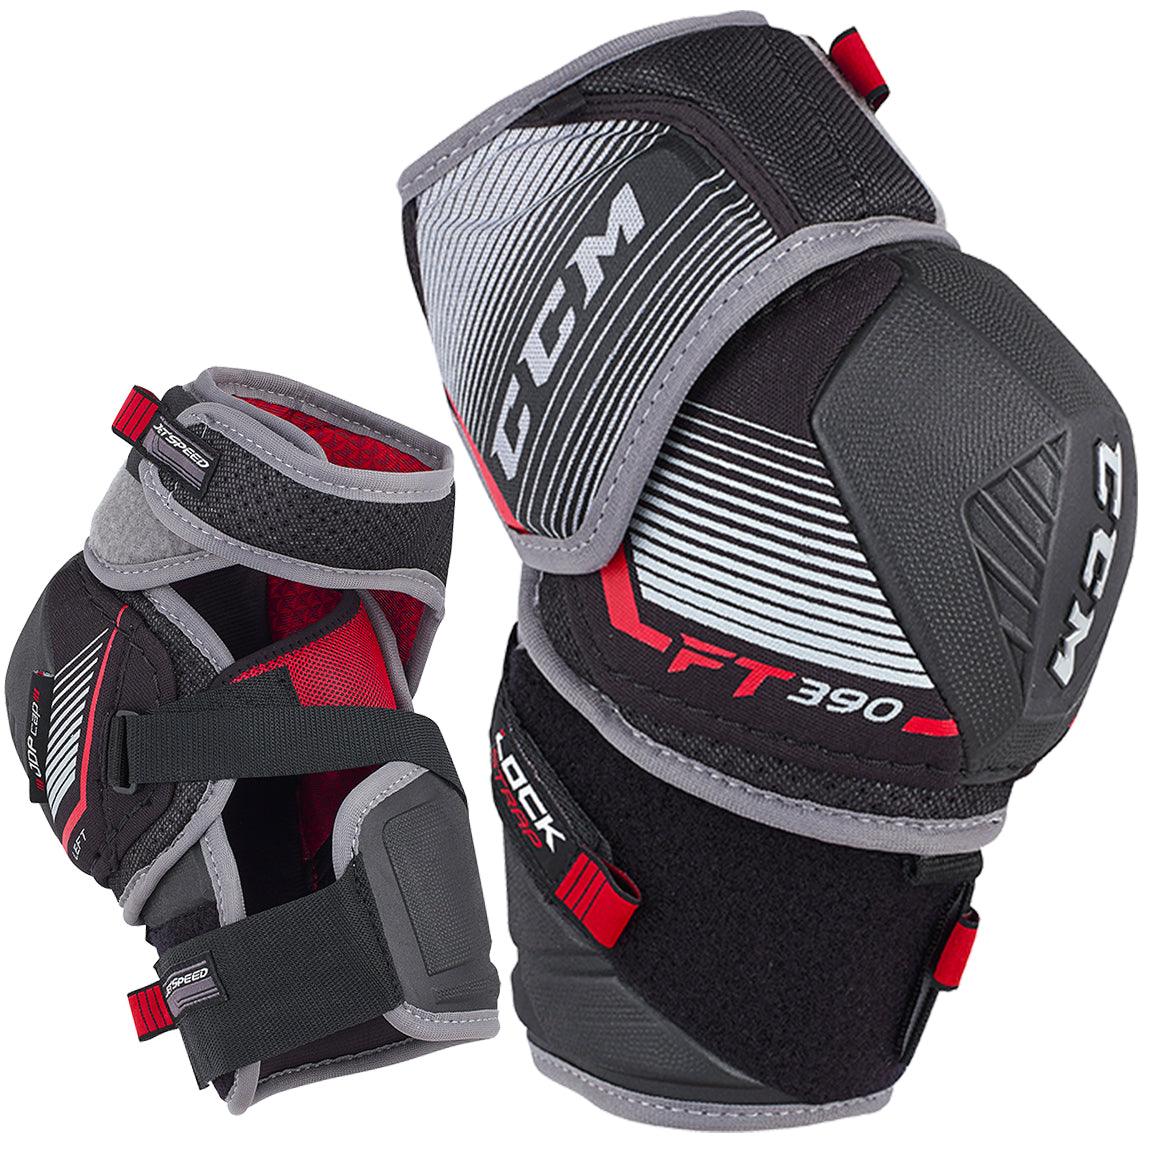 JetSpeed FT390 Elbow Pads - Senior - Sports Excellence